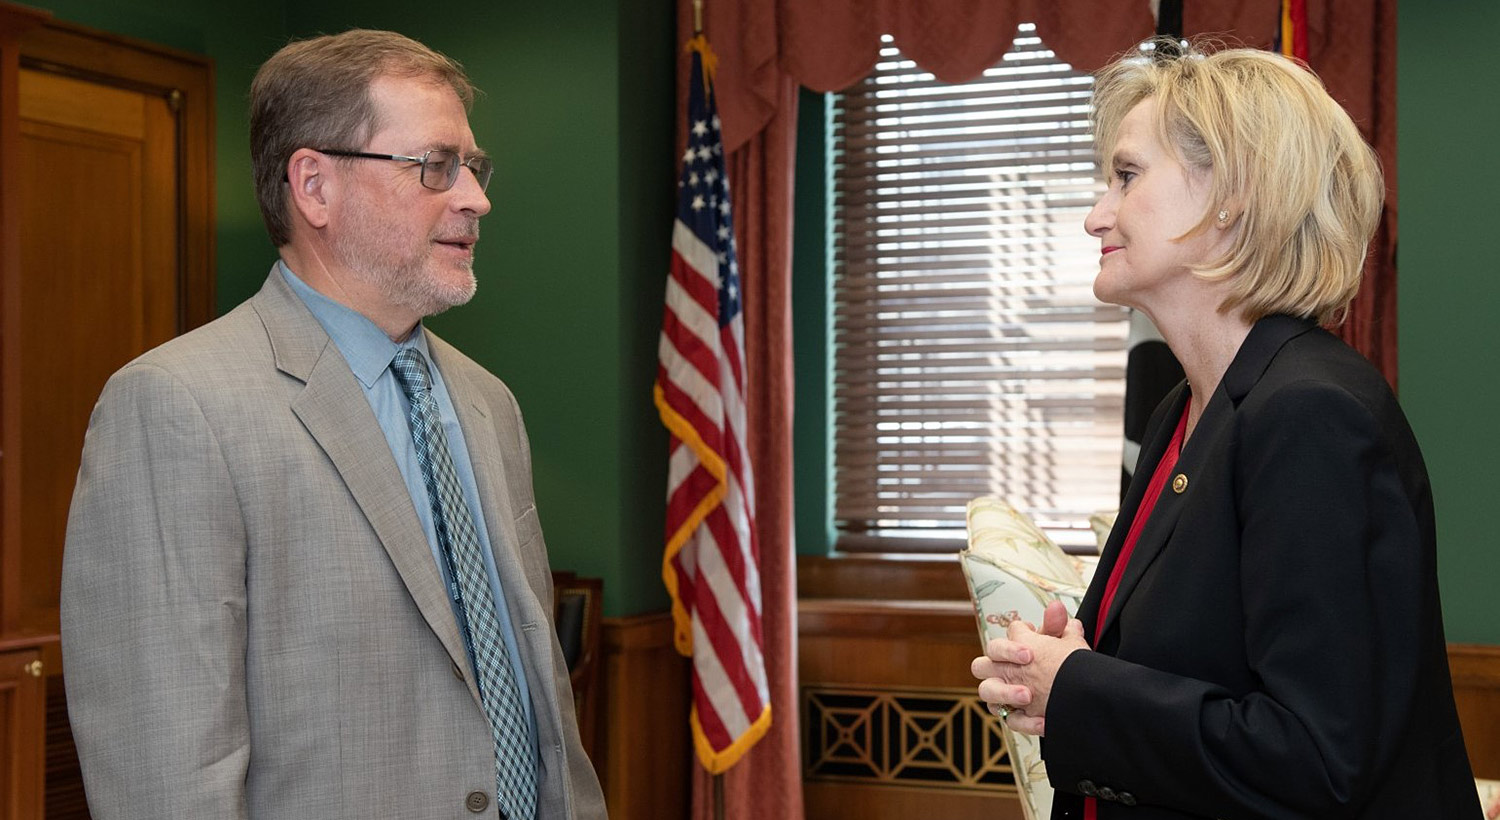 Senator Hyde-Smith meets with Grover Norquist, president of Americans for Tax Reform